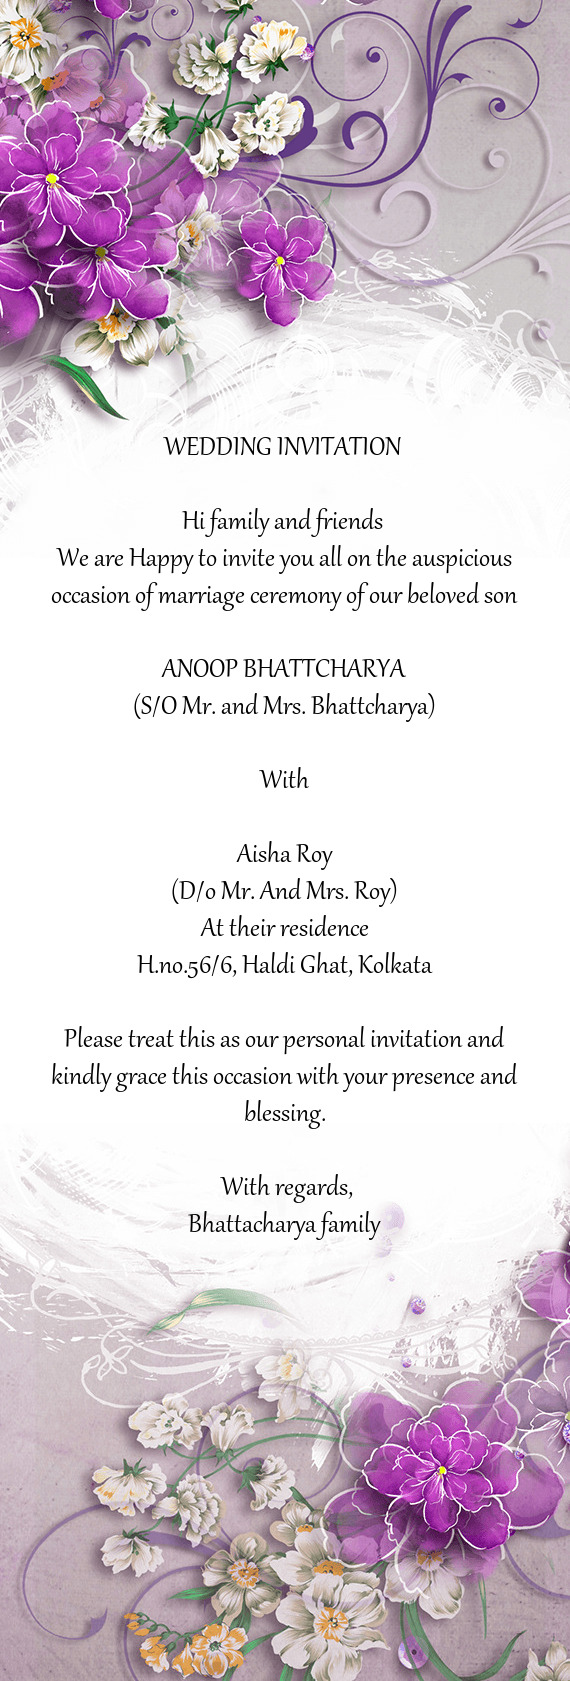 We are Happy to invite you all on the auspicious occasion of marriage ceremony of our beloved son